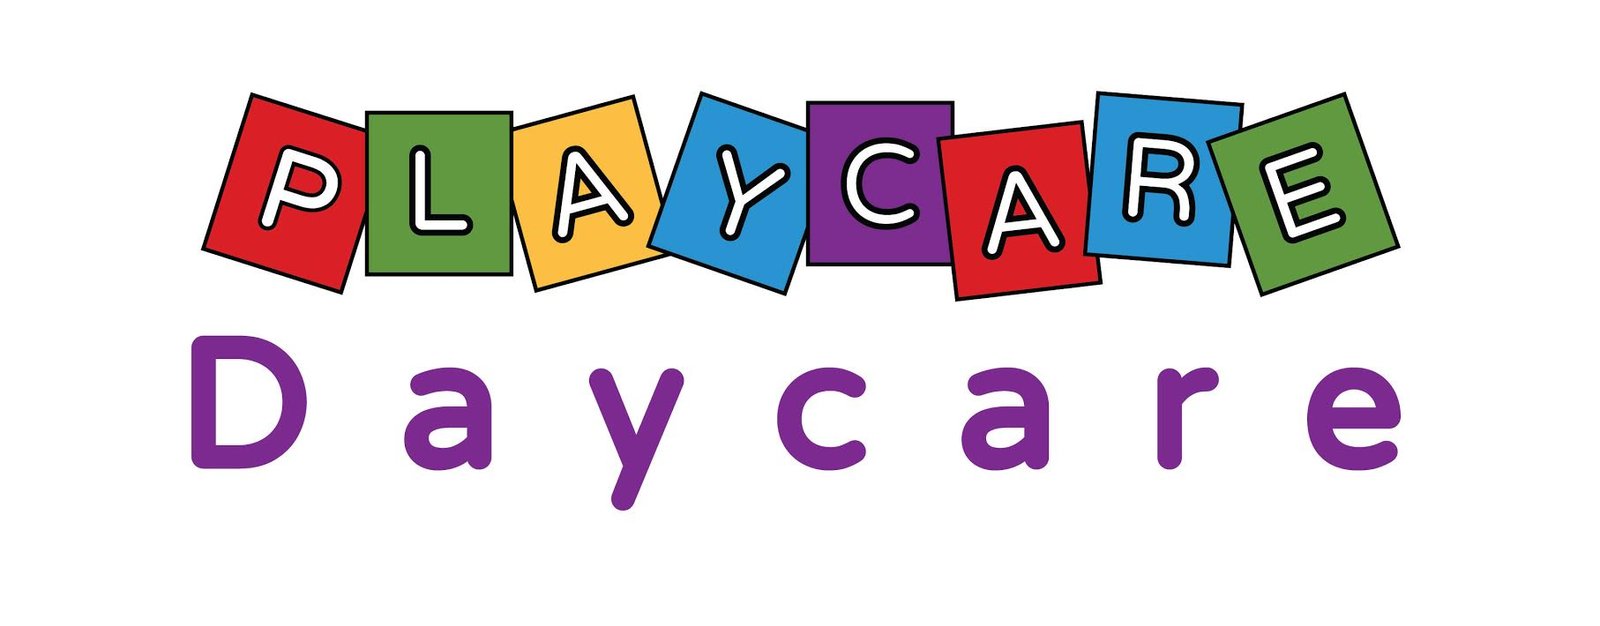 'Edmonton Playcare Daycare' 'Learning Through Play'